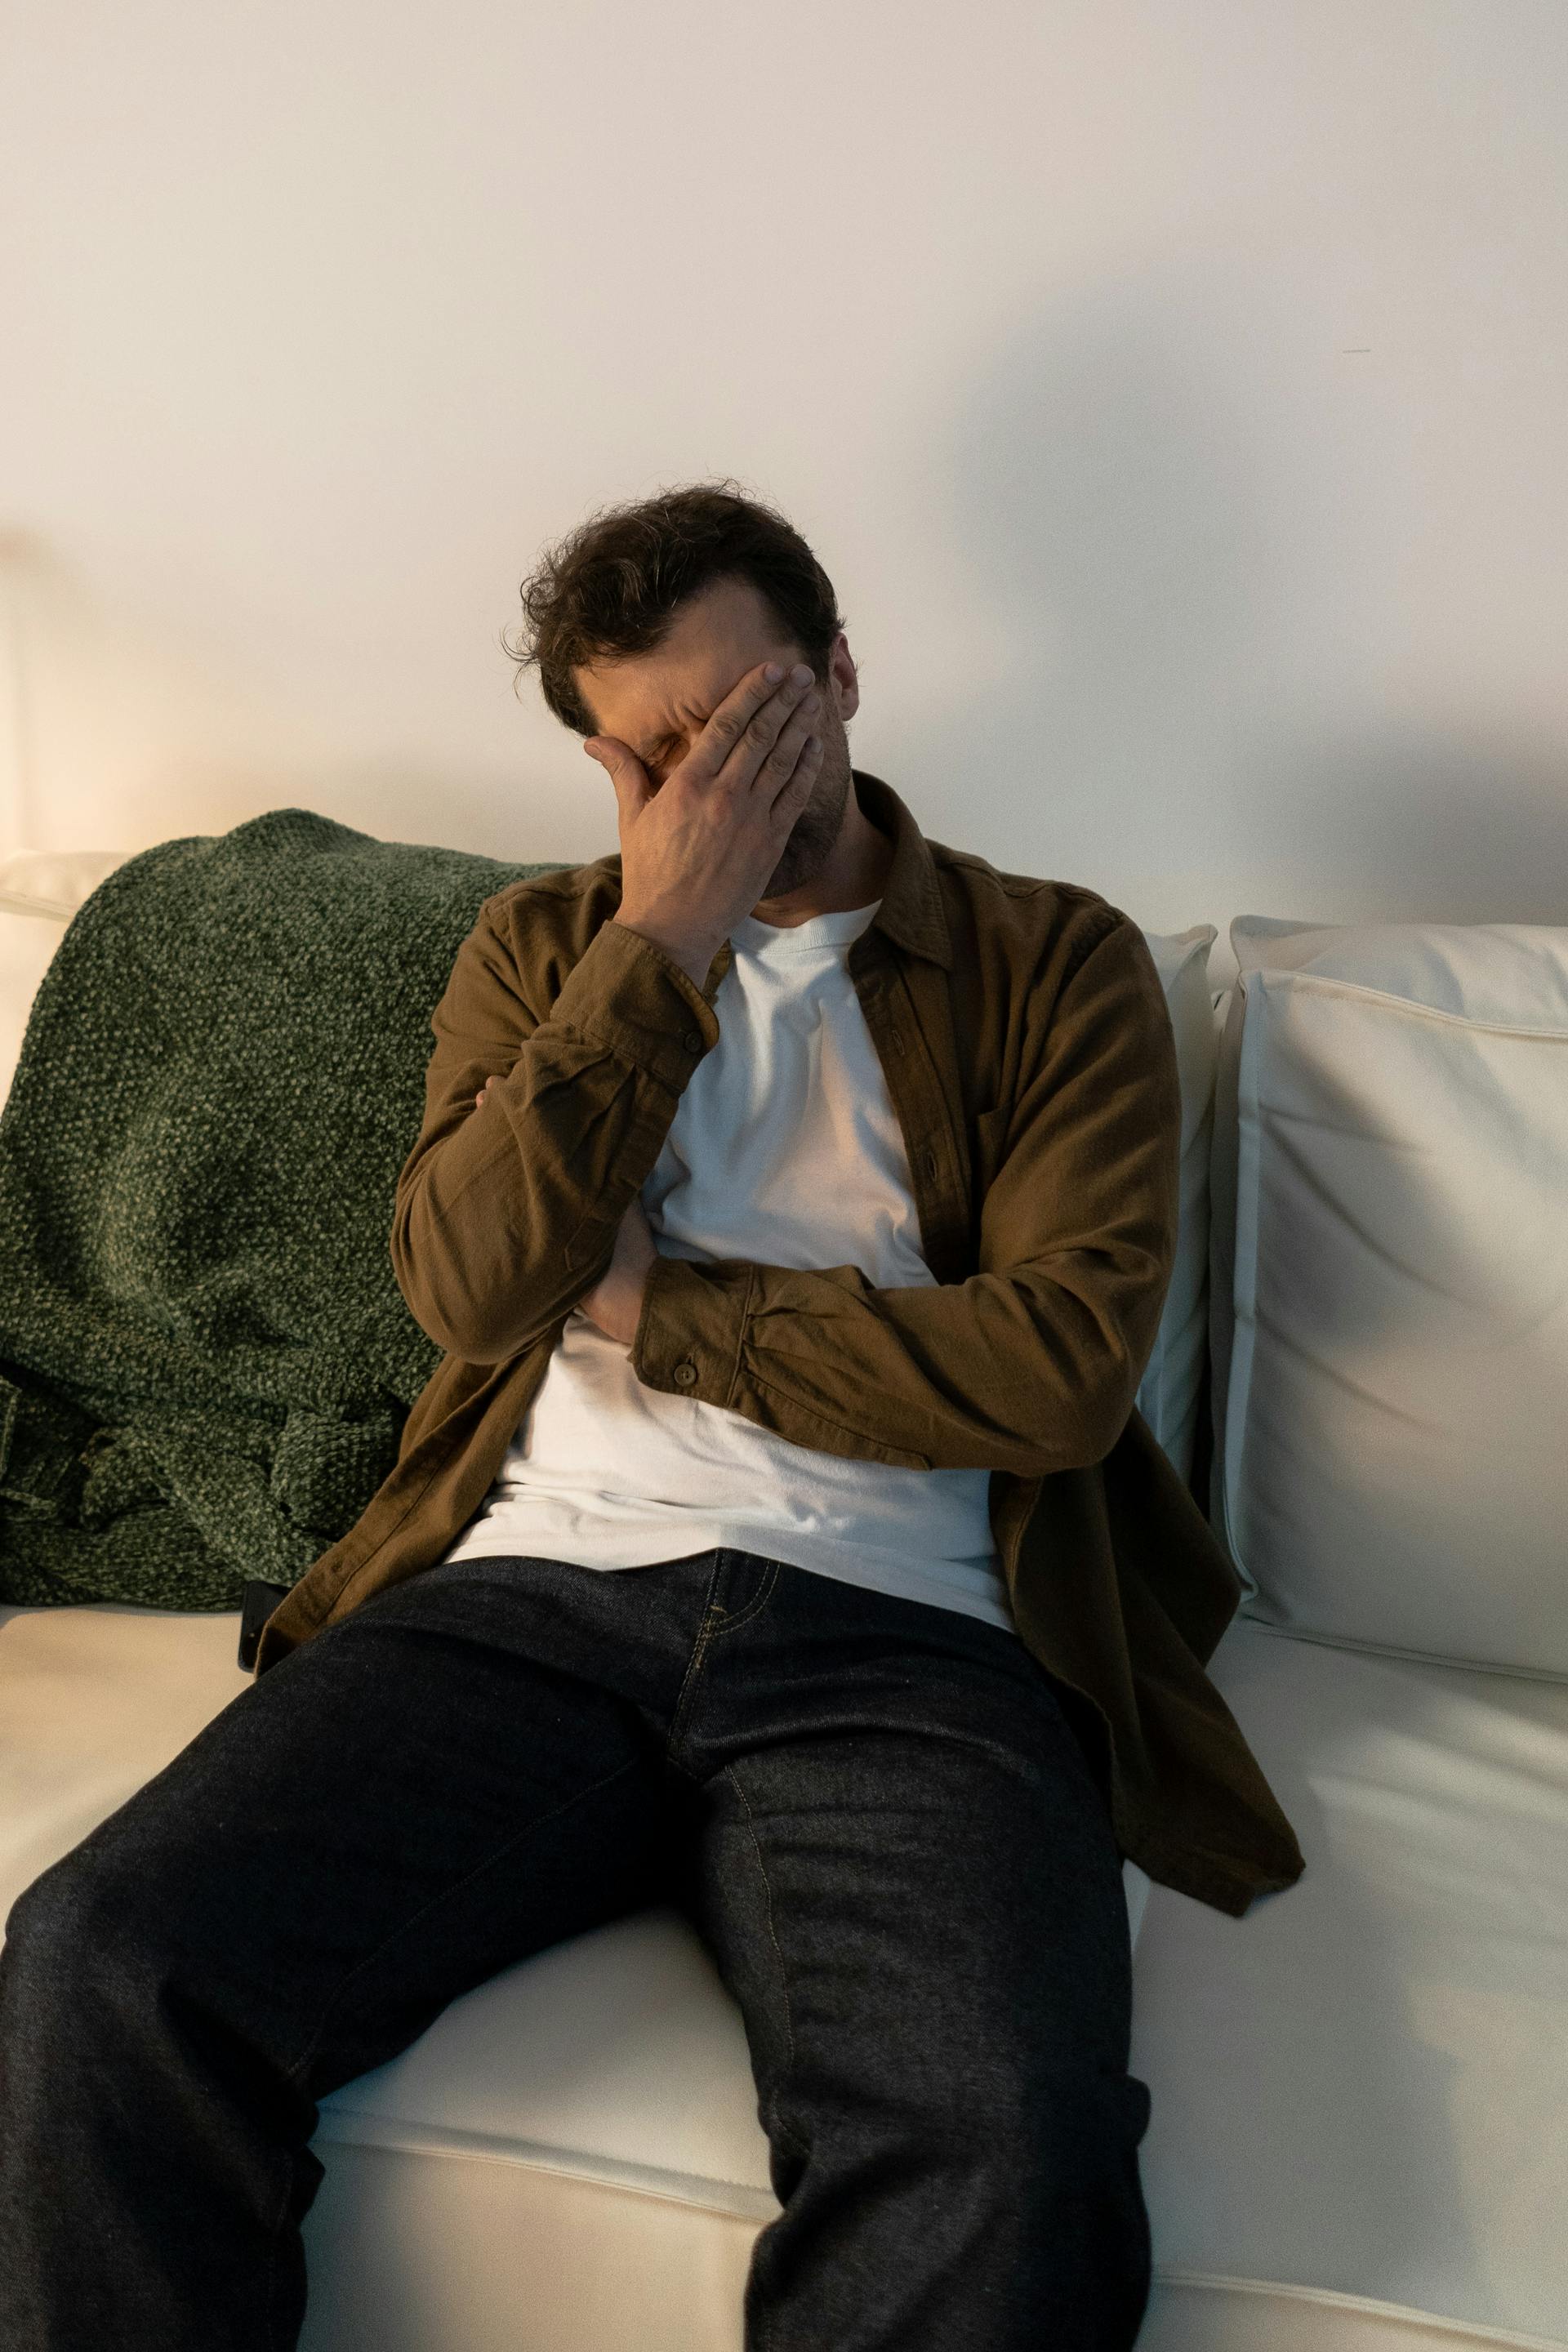 A distressed man sitting on a couch | Source: Pexels